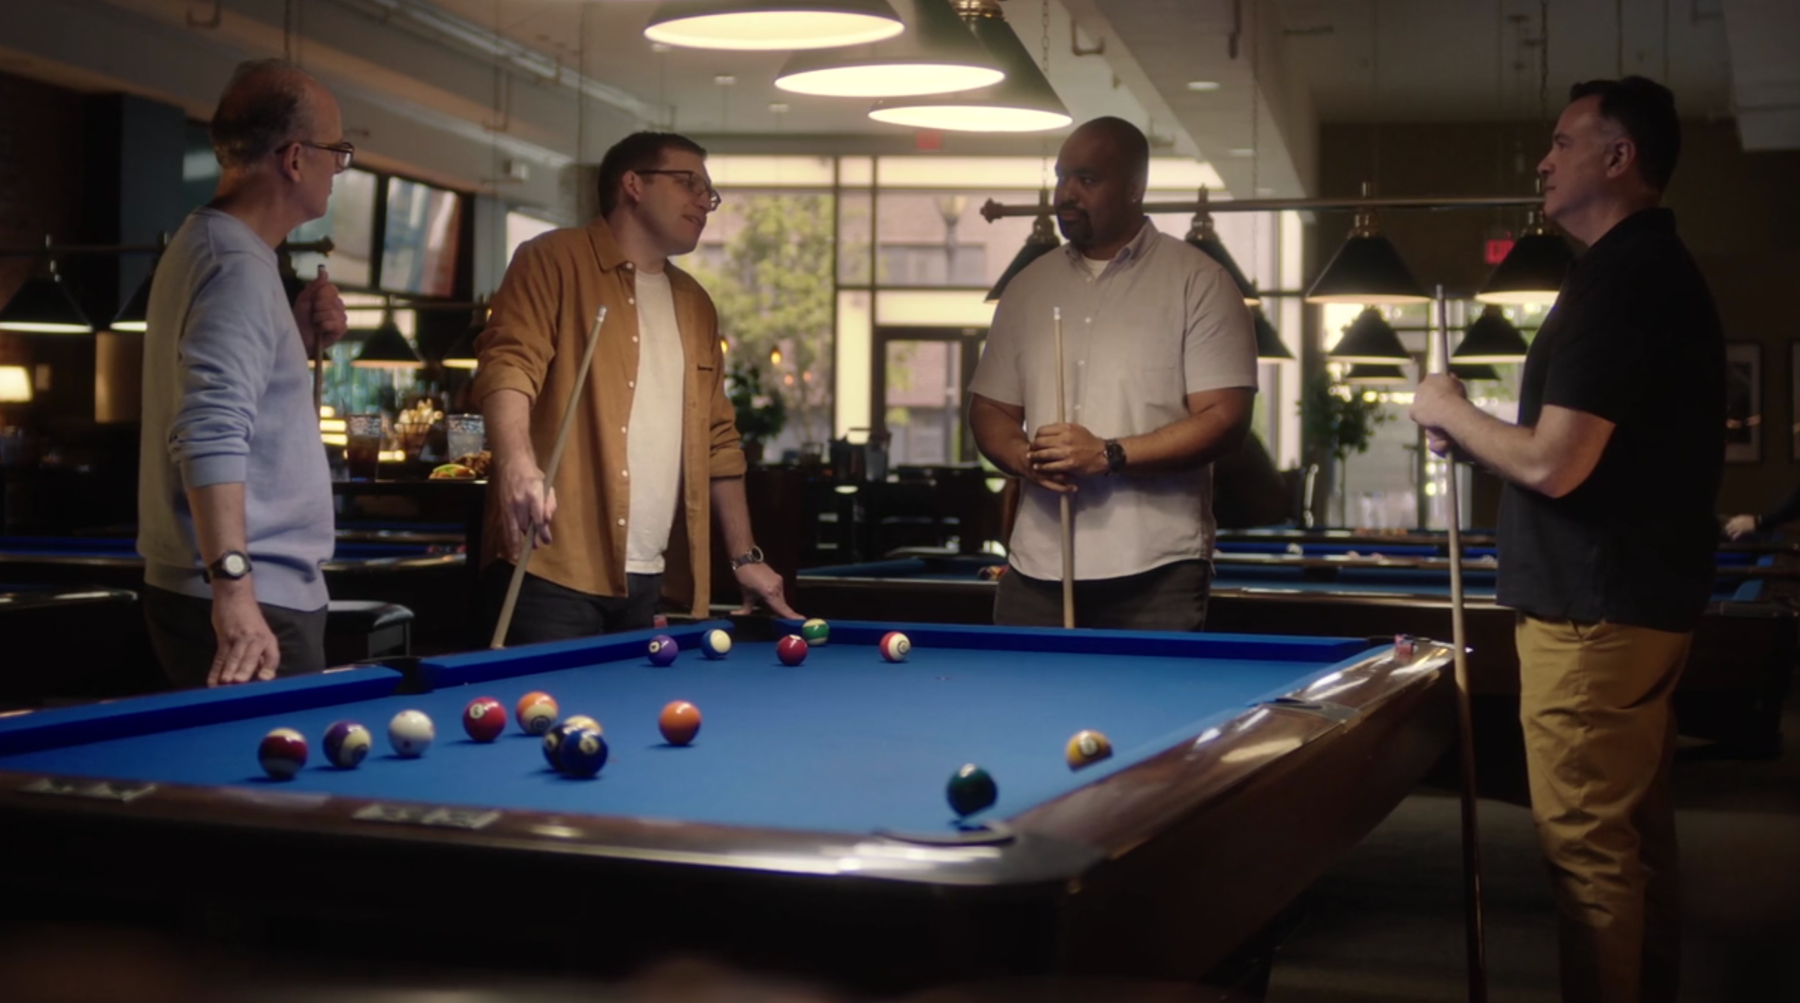 Endo brings men to the pool hall for straight talk on Peyronie’s in latest Xiaflex push